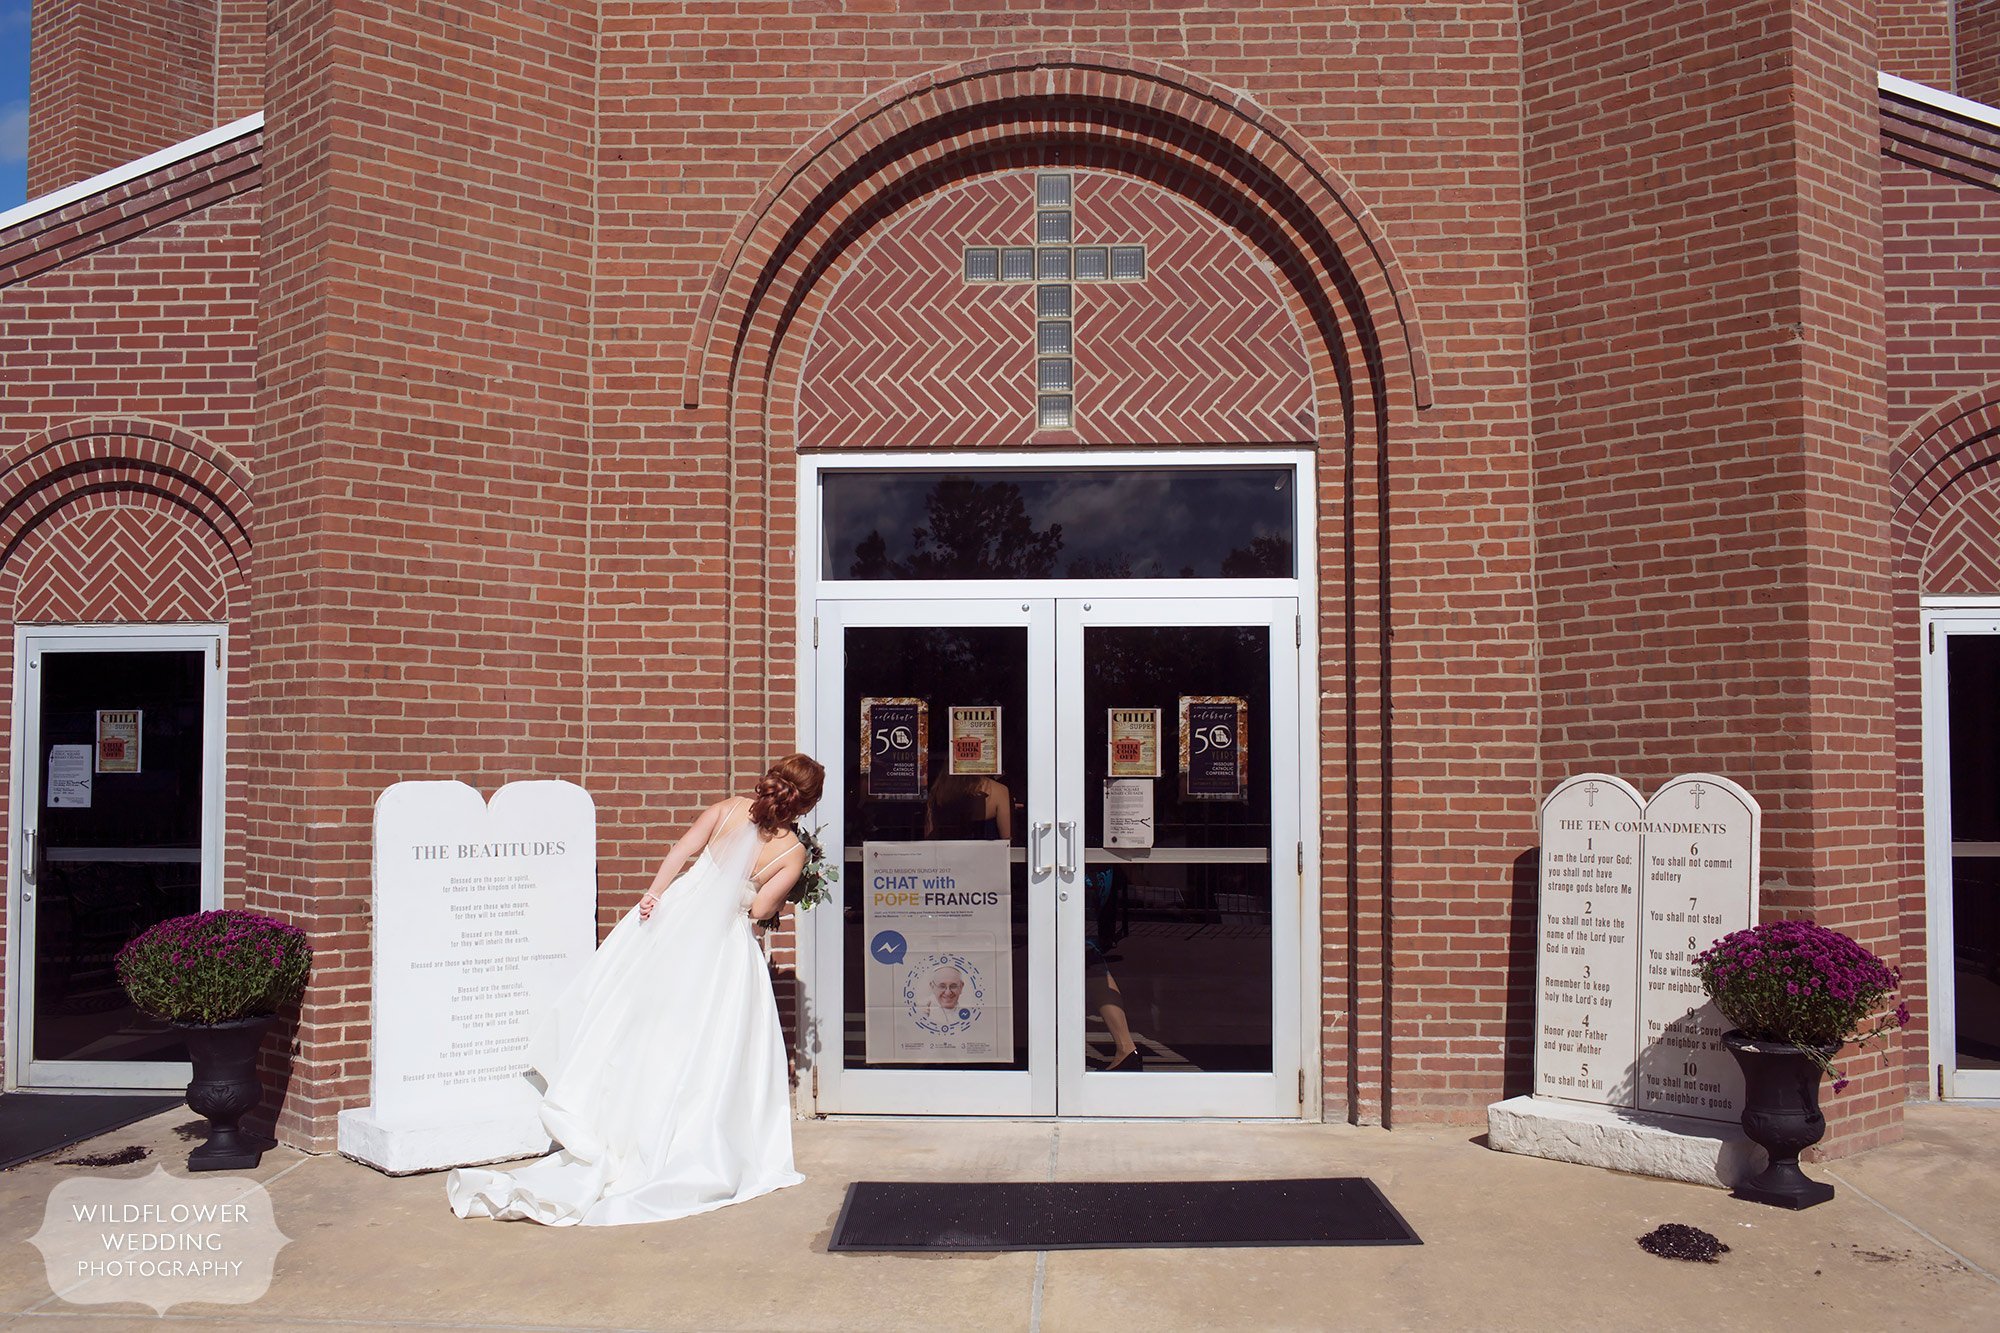 Great documentary wedding photo of the bride looking in the windows of the church before her Jeff City, MO wedding.